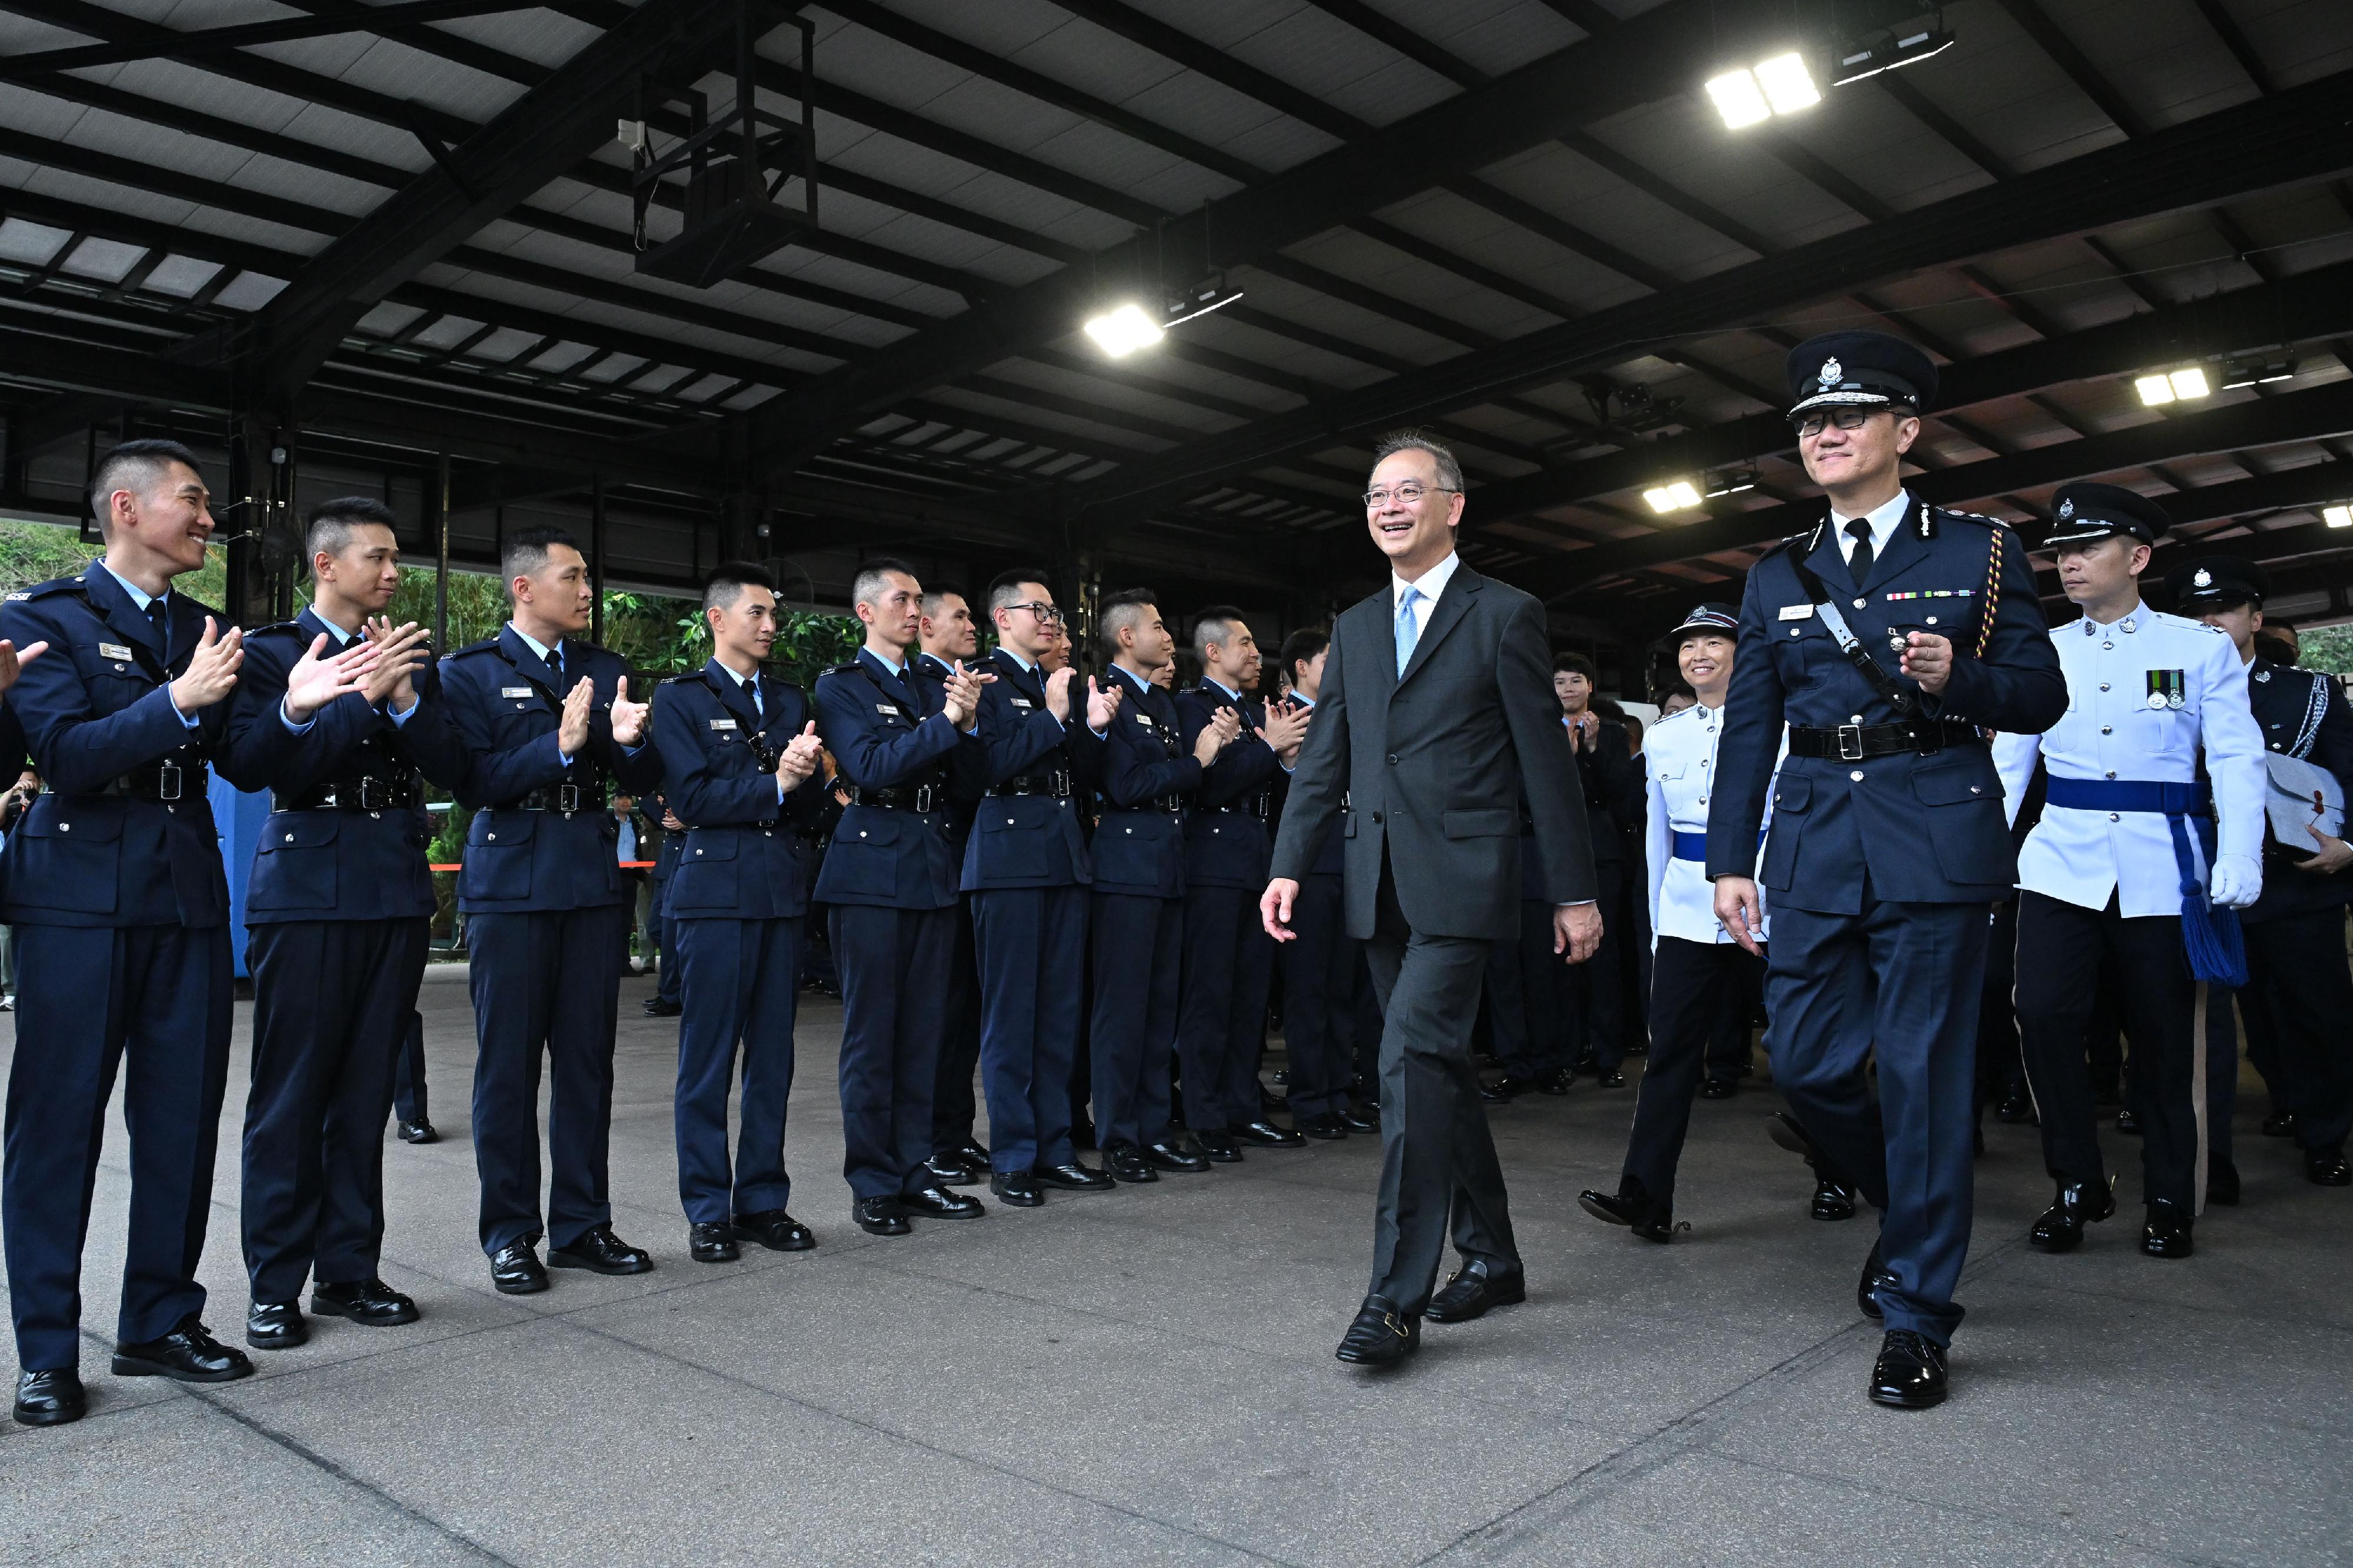 The Chief Executive of the Hong Kong Monetary Authority, Mr Eddie Yue Wai-man (front row, second right), accompanied by the Commissioner of Police, Mr Siu Chak-yee (front row, first right), meets graduates after the passing-out parade held at the Hong Kong Police College today (April 27).